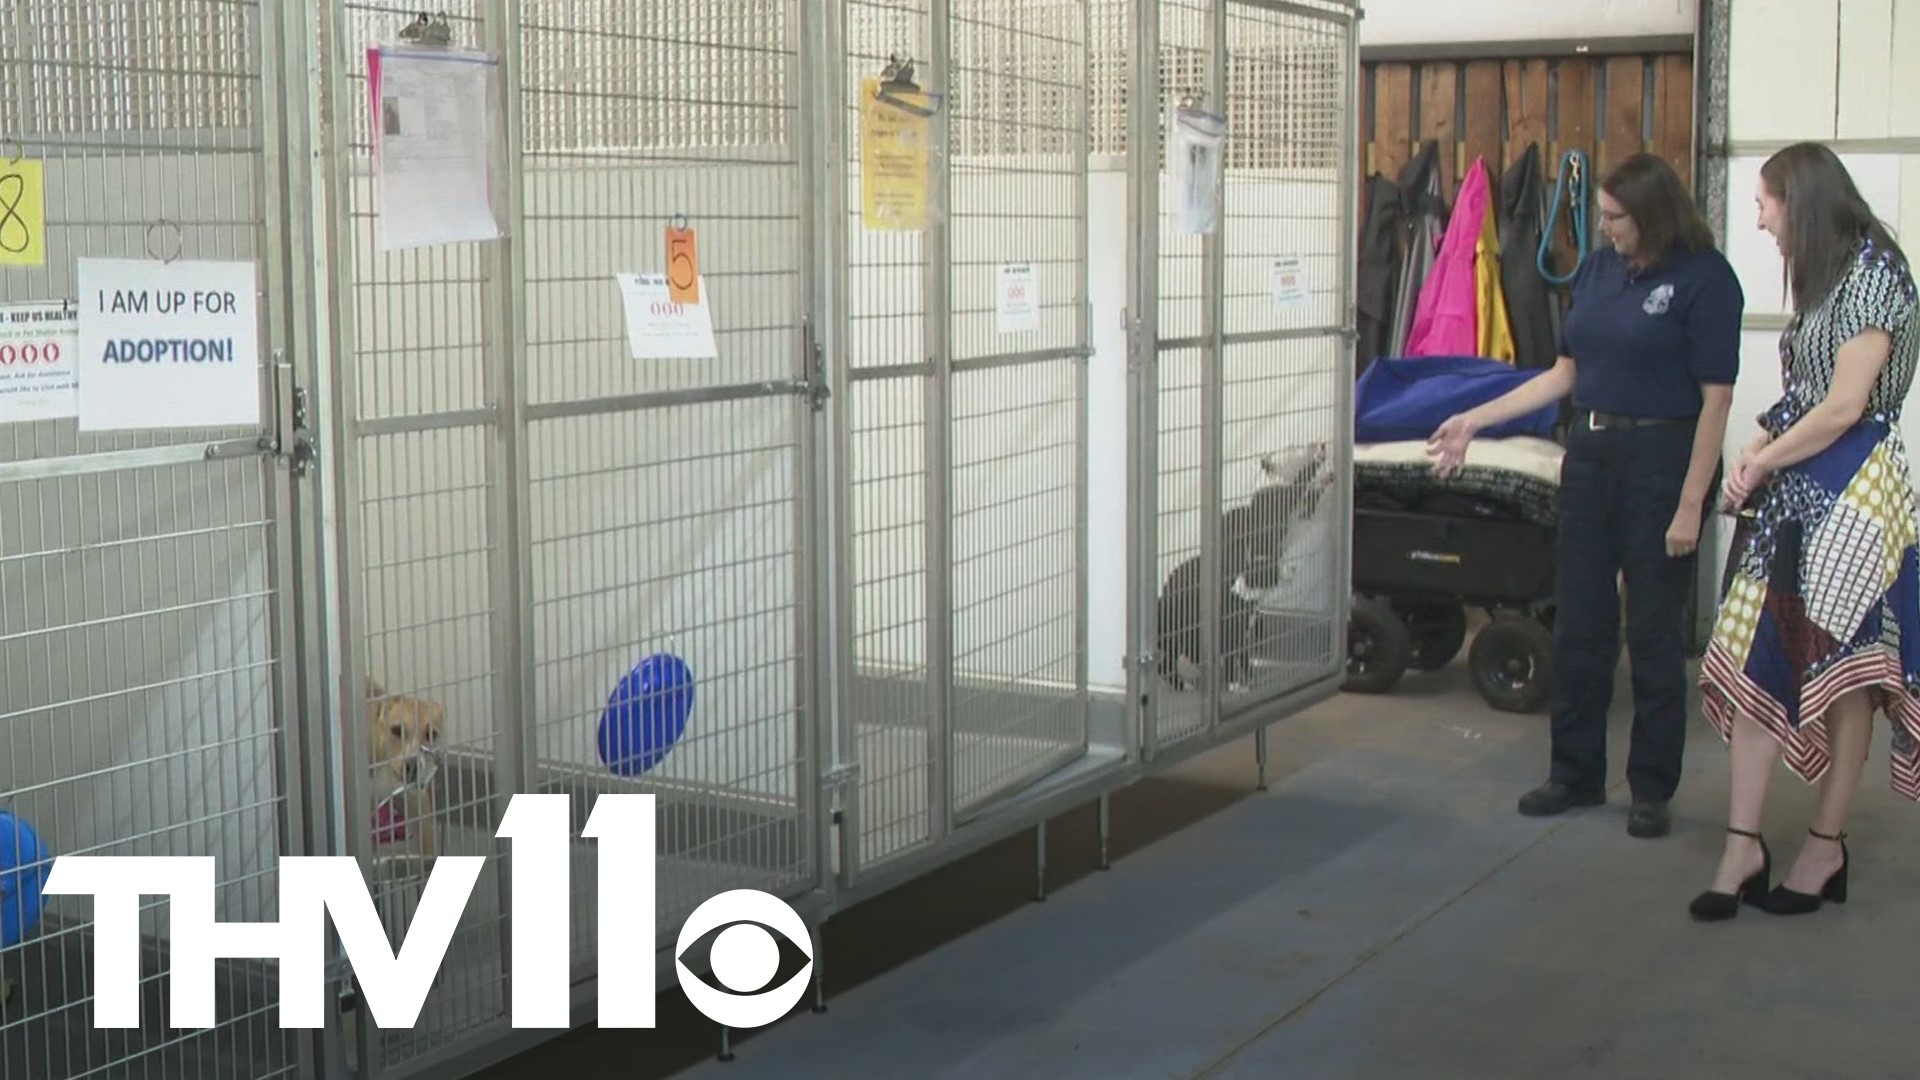 Animal shelters across Arkansas have been dealing with overcrowding and the issues of whether or not to euthanize— one city has been working to save every animal.